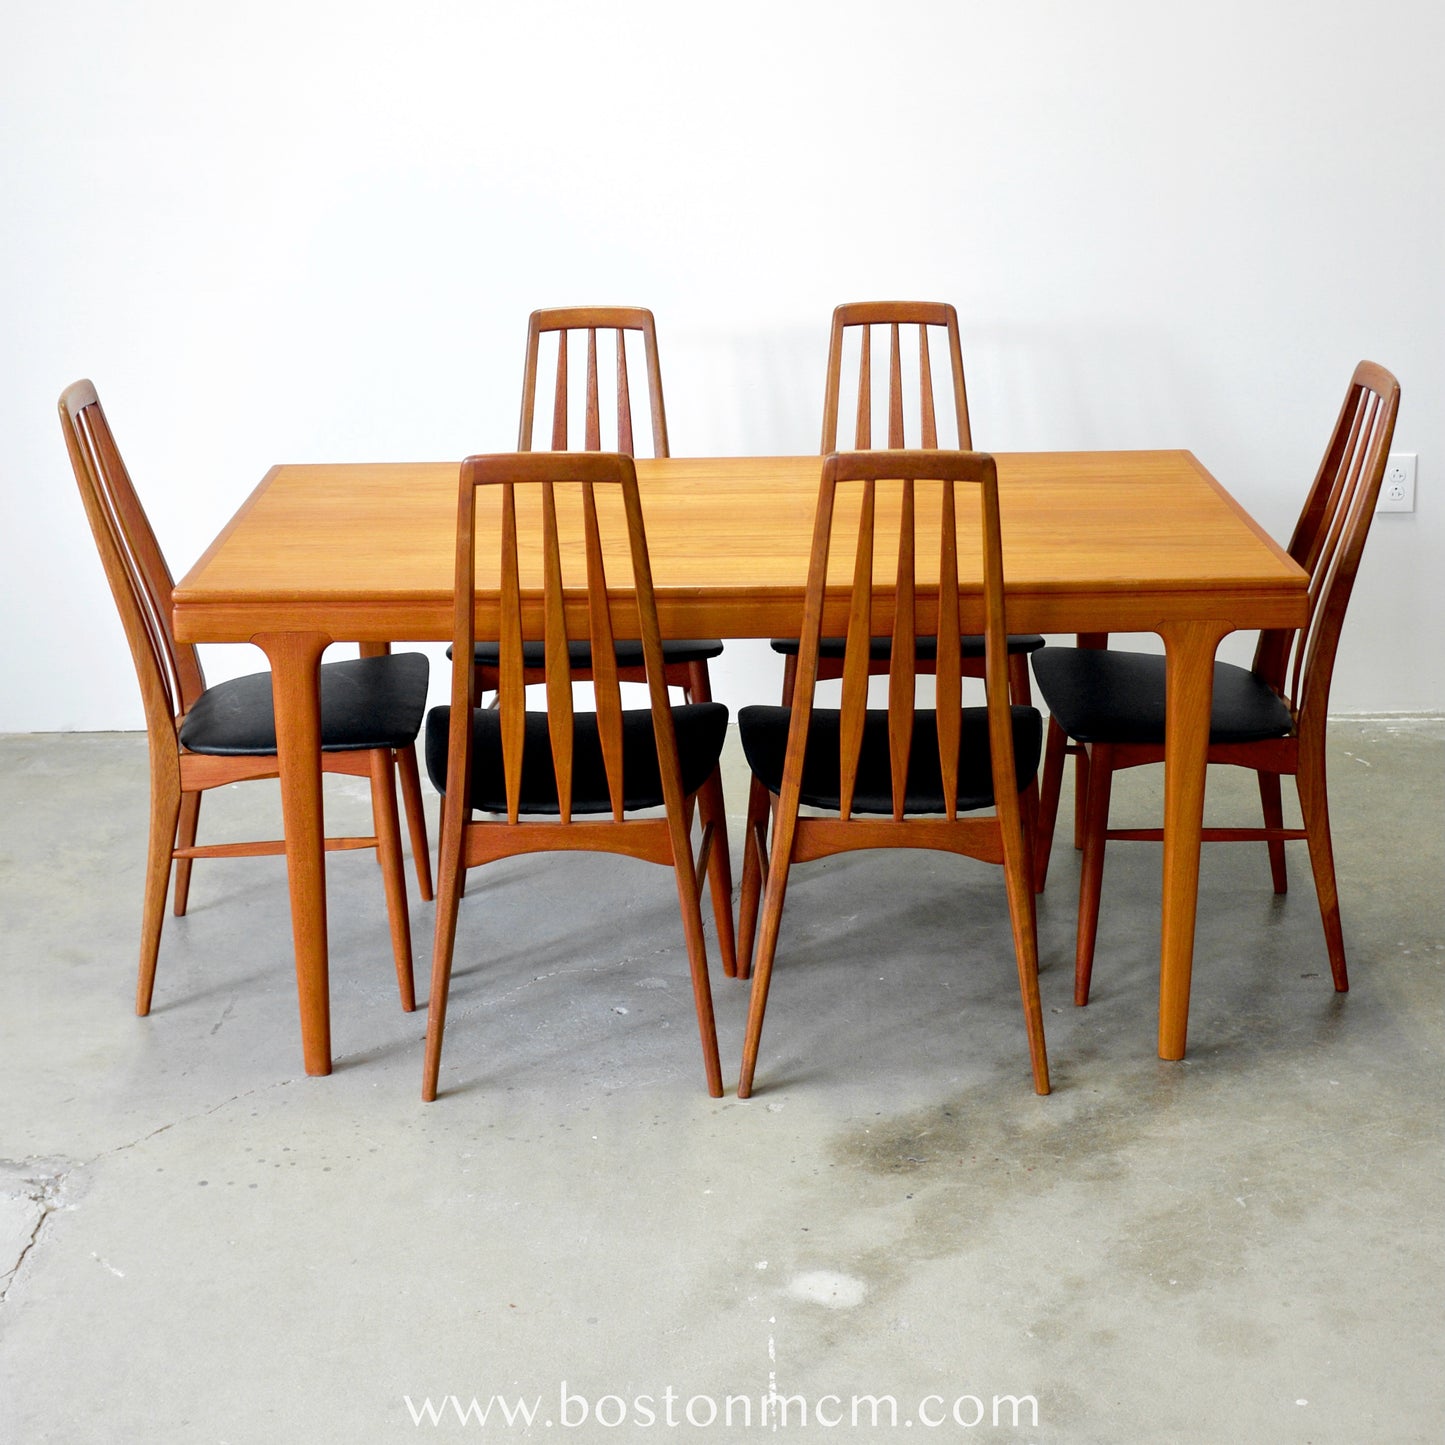 Johannes Andersen Danish Teak Dining Table with Two Butterfly Leaves